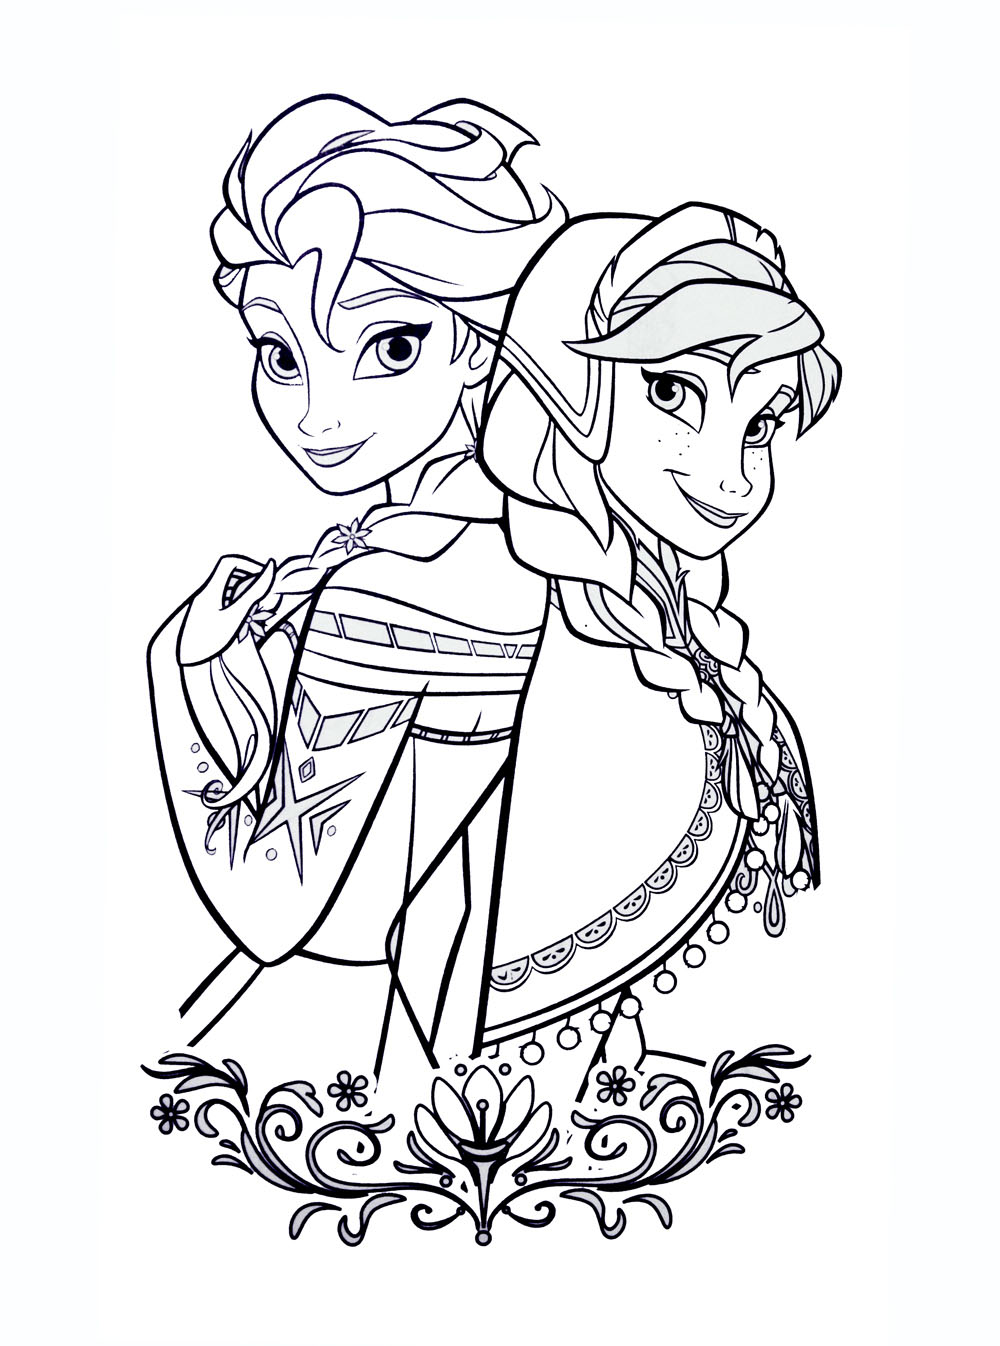 frozen-free-to-color-for-kids-frozen-kids-coloring-pages